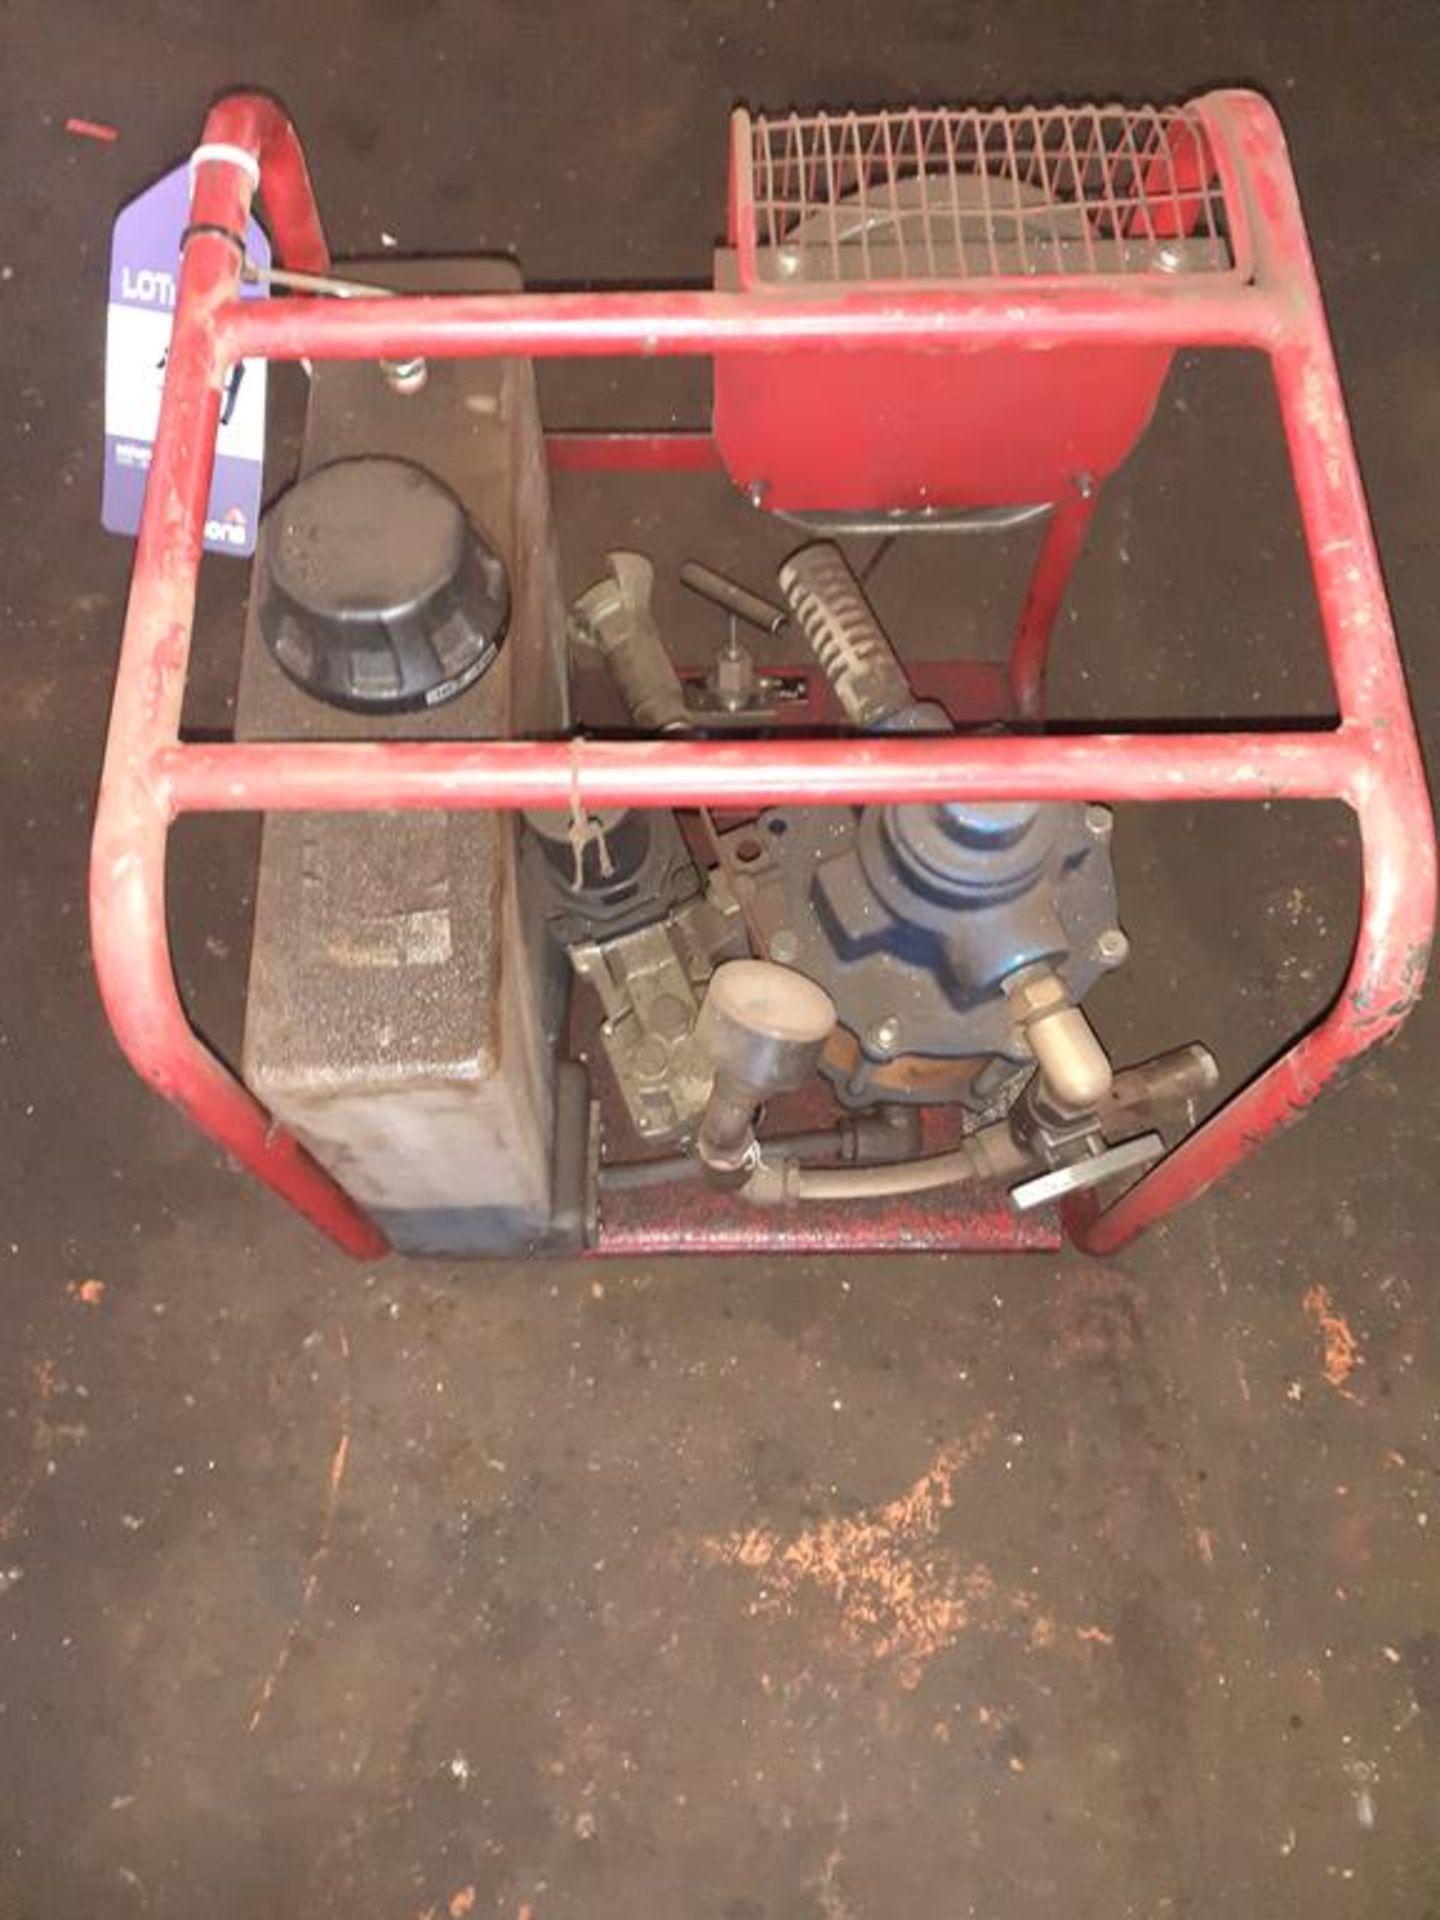 Crate to Contain 2 x Hydraulic Pumps, Pipe Bender and Qty of Hydraulic Hoses - Image 3 of 6